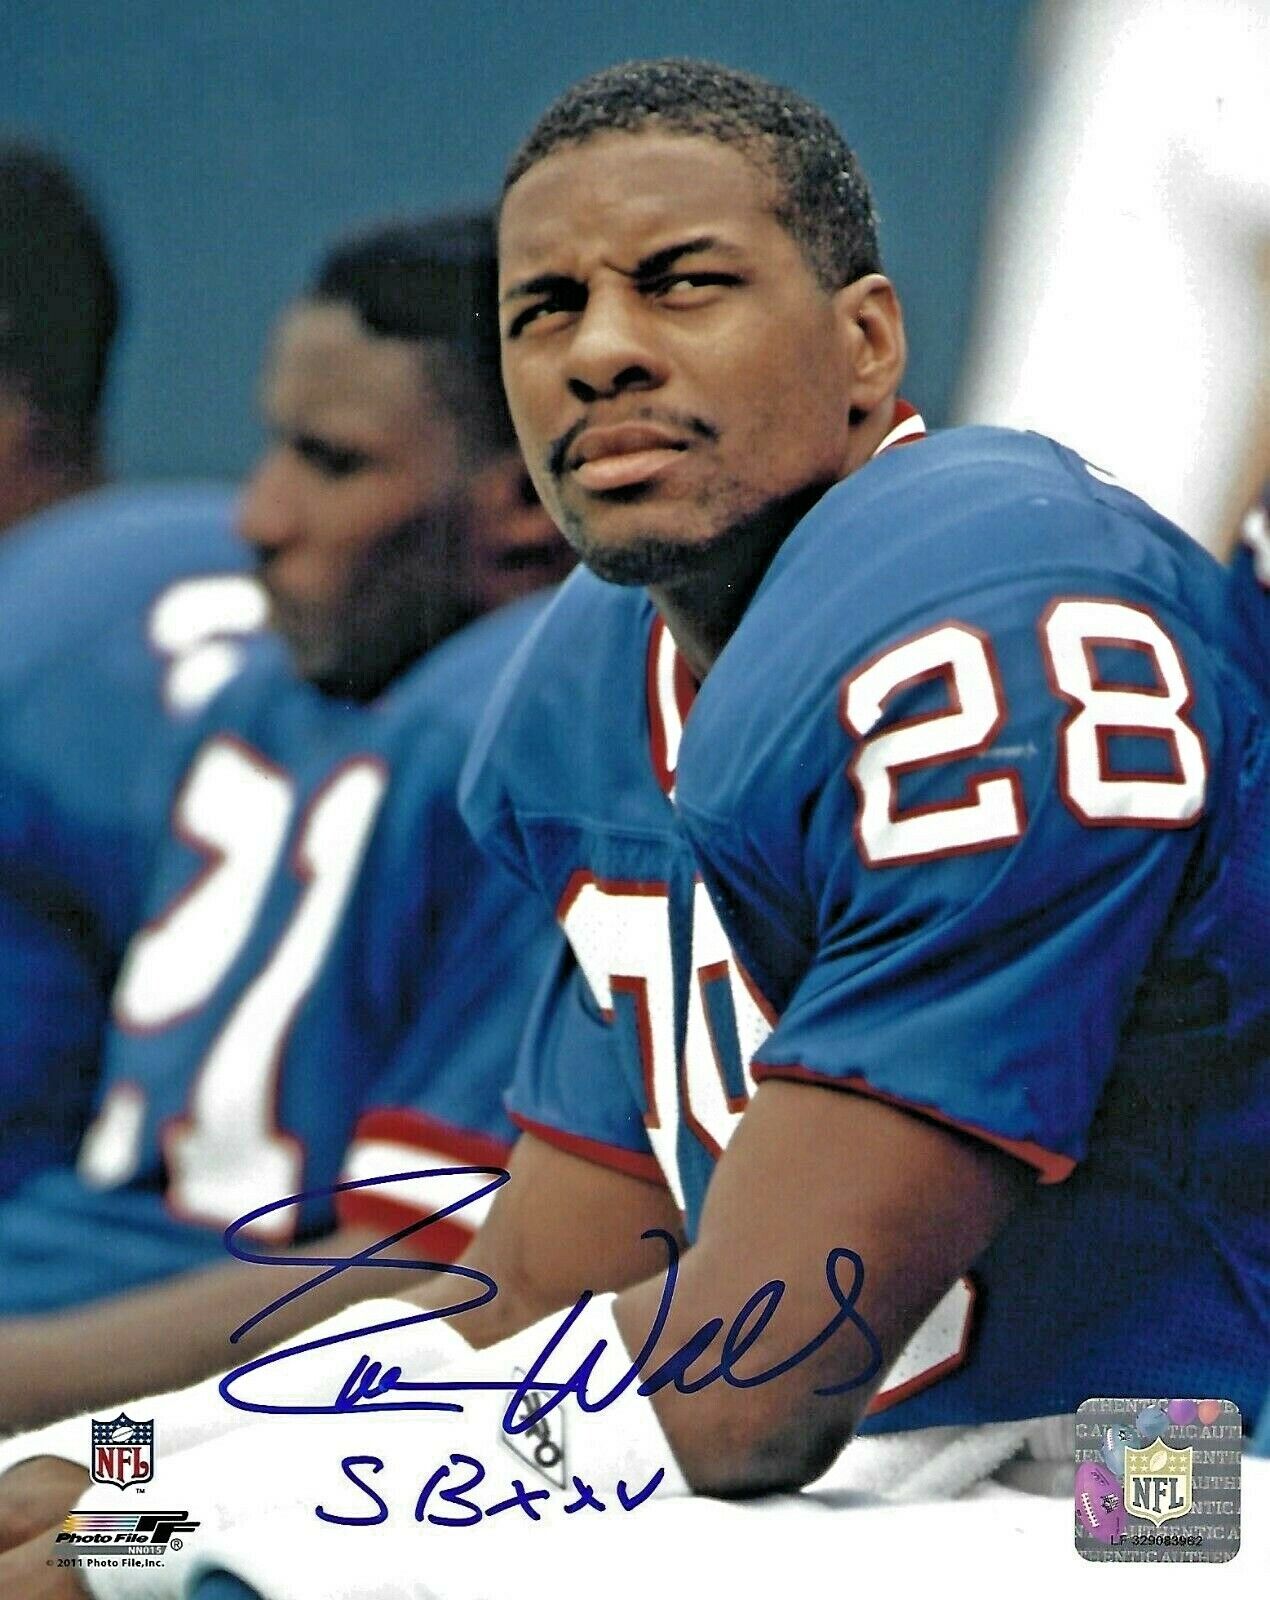 Autographed Everson Walls New York Giants Autographed 8x10 Photo Poster painting - w/COA